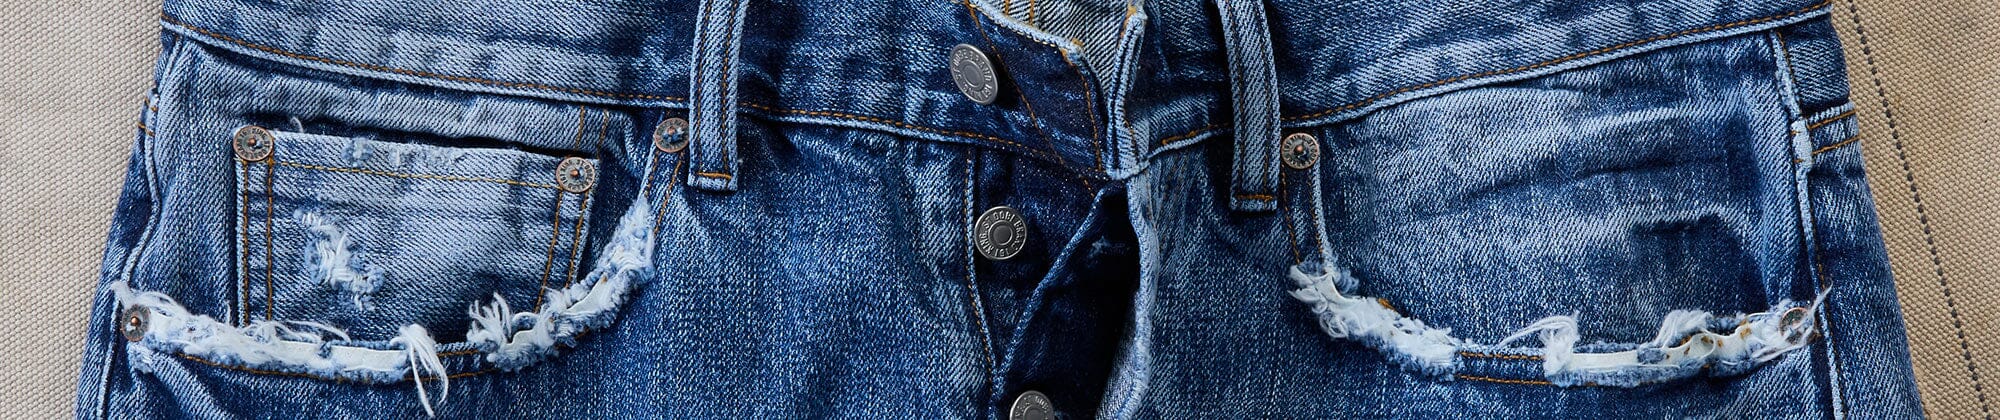 close up image of the top of mens jeans